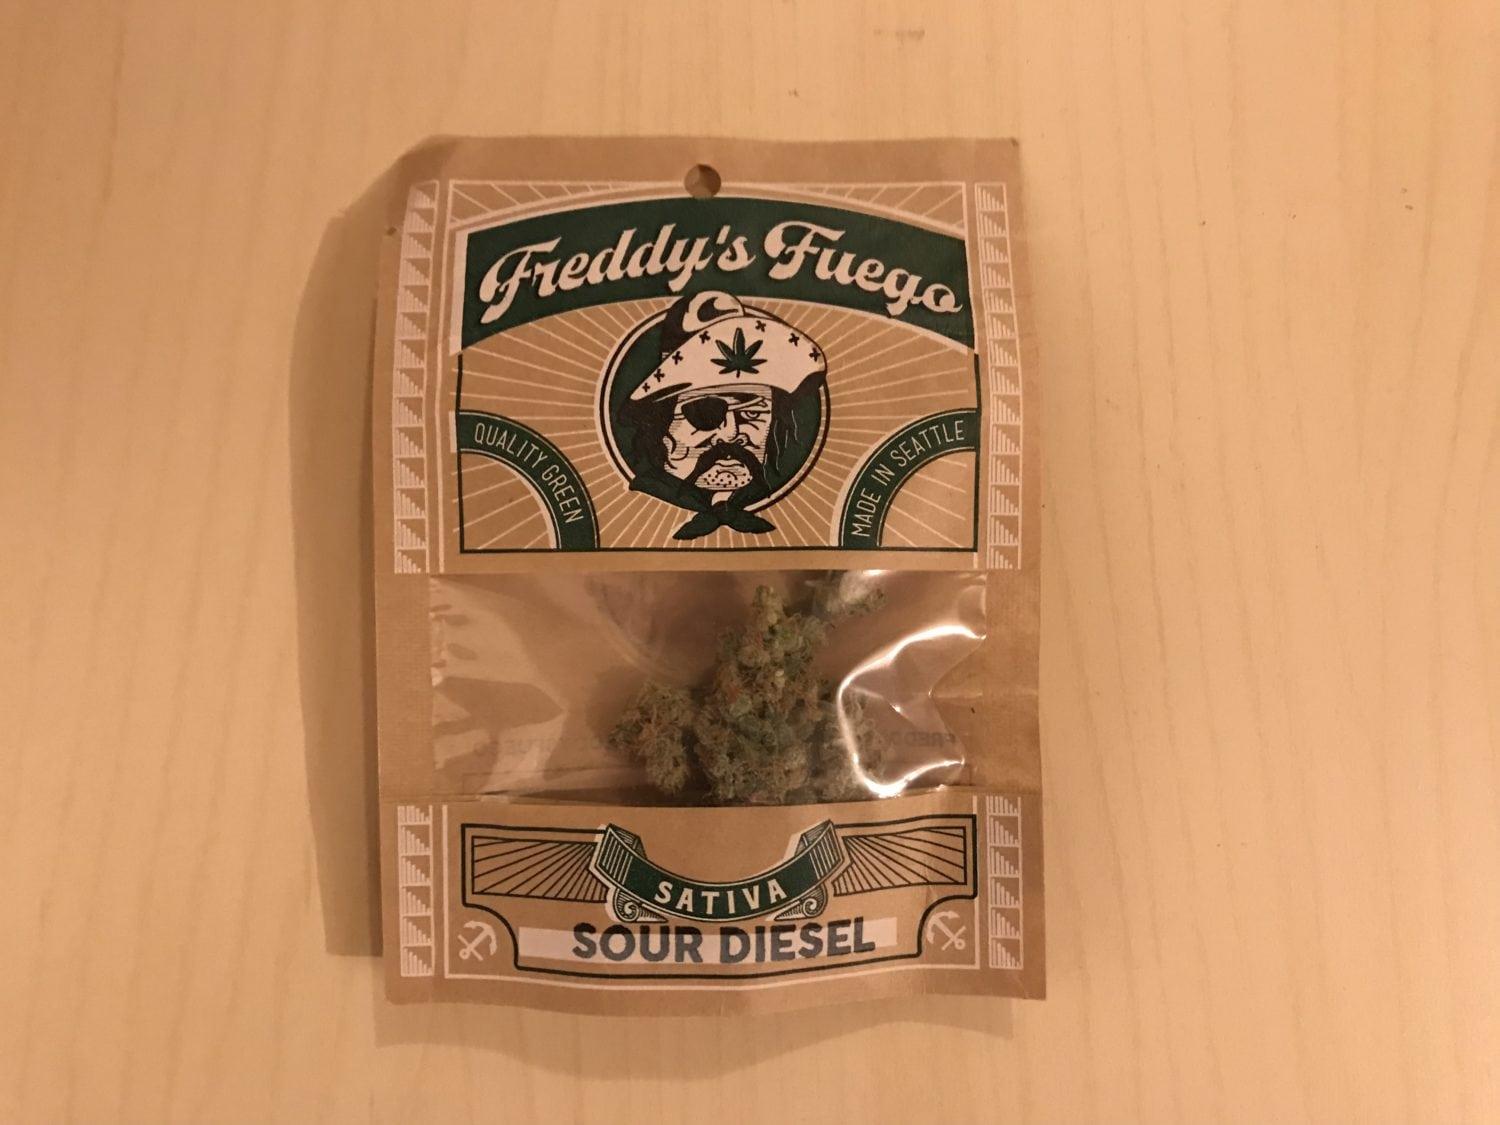 Sour D Logo - Sour Diesel From Freddy's Fuego. Respect My Region